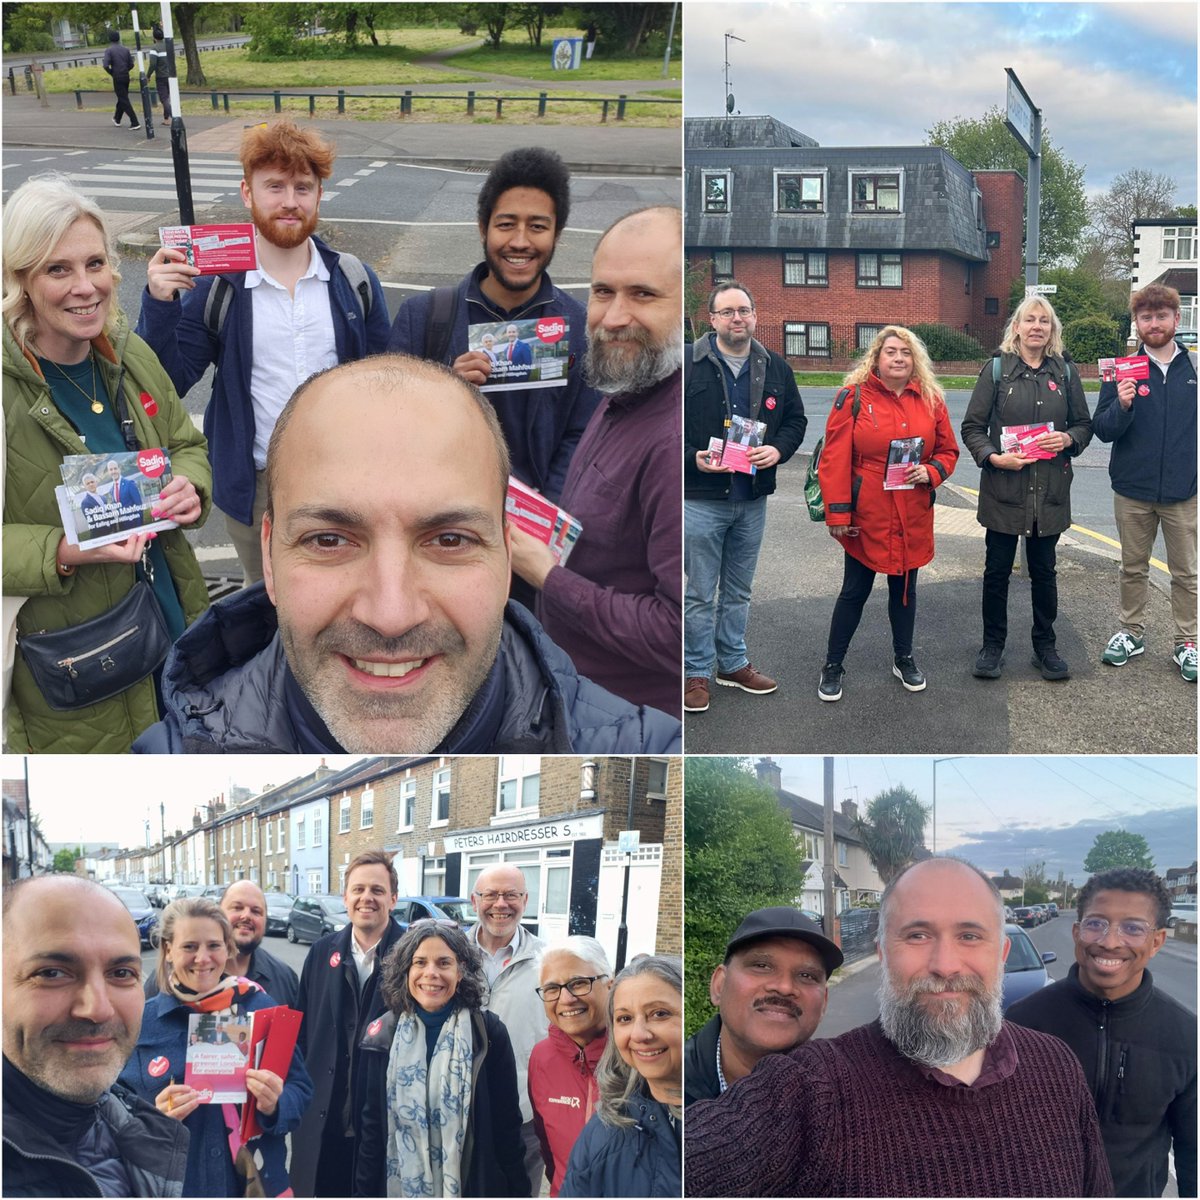 Another great door on the #LabourDoorstep across #Ealing & #Hillingdon People using all 3 votes for Labour to make Free School Meals permanent & stop Tories cutting them🌹 ✅@SadiqKhan for Mayor 🌹 ✅@BassamMahfouz for Ealing & Hillingdon 🌹 ✅@LondonLabour for Assembly 🌹